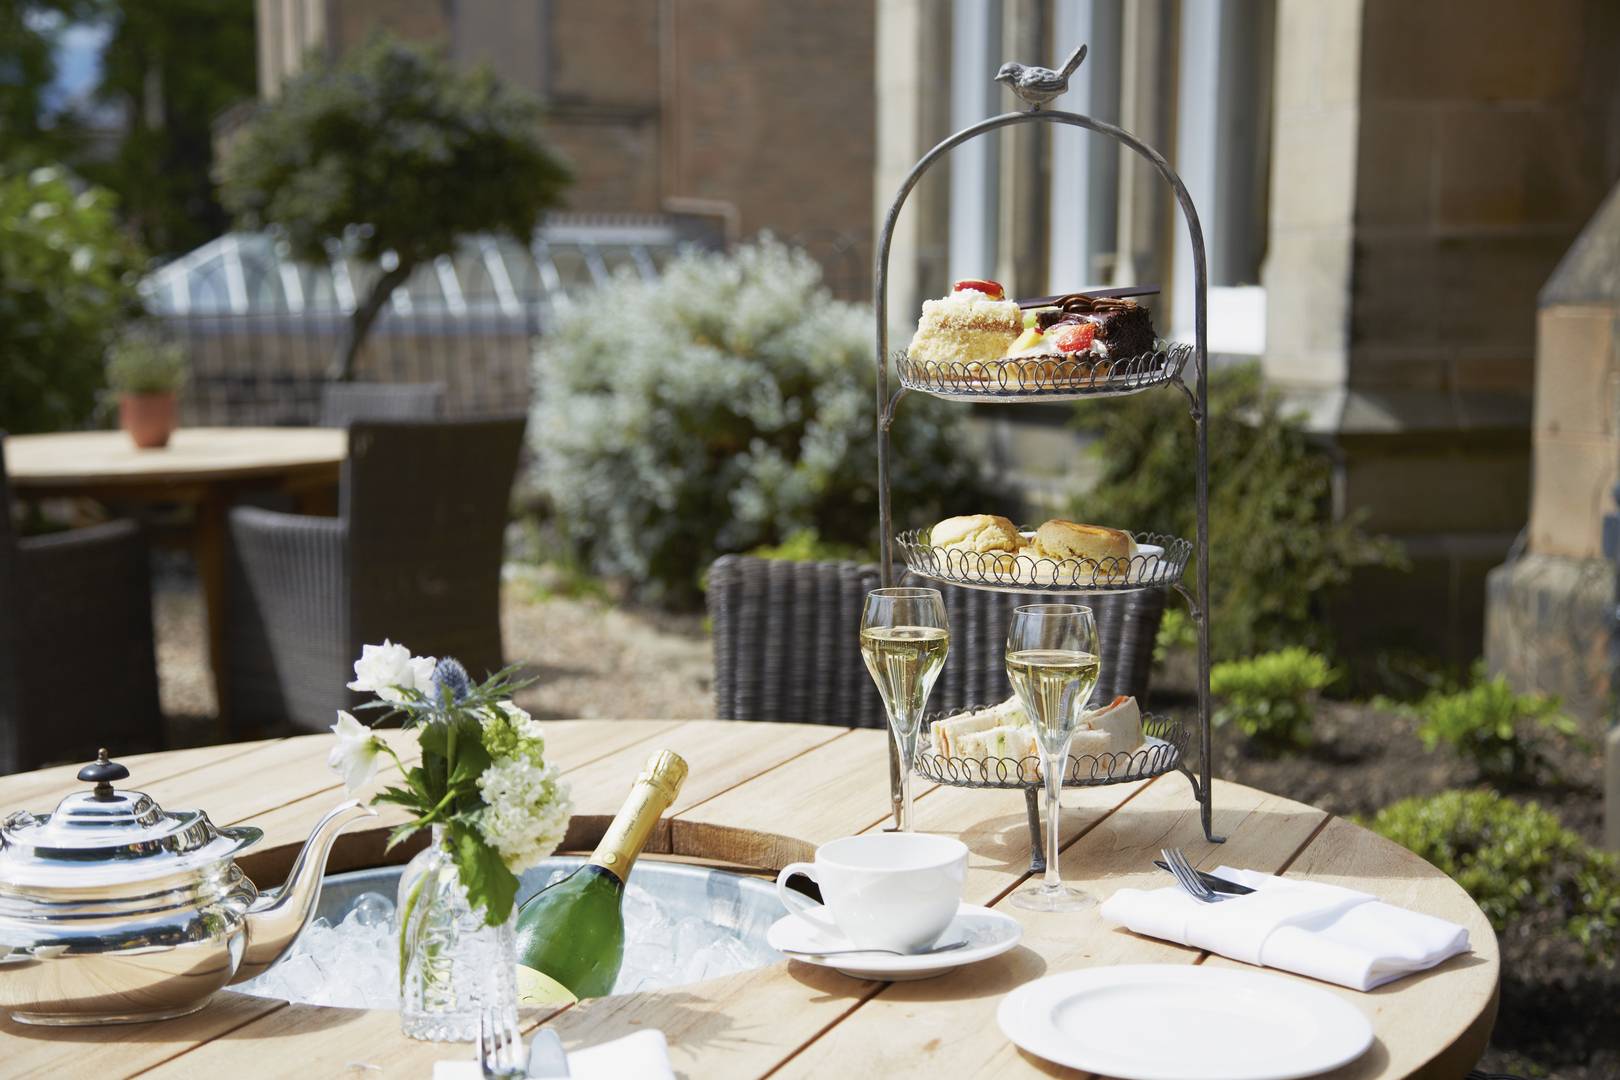 Afternoon Tea outside at The Roseate